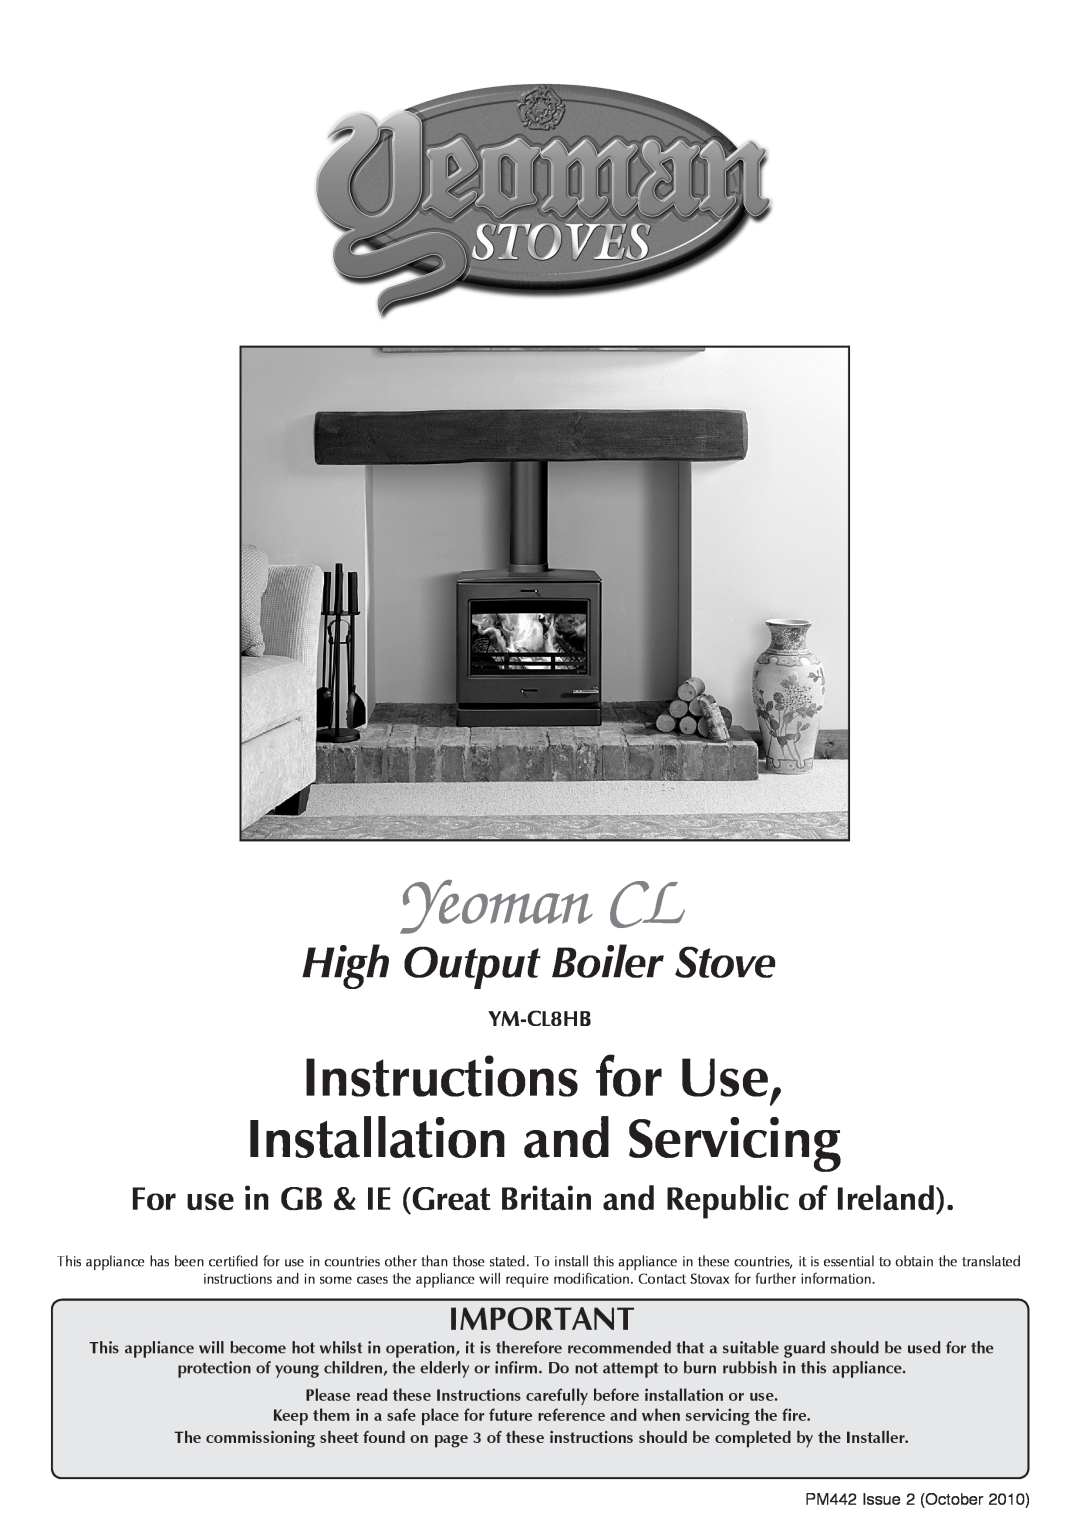 Yeoman YM-CL8HB manual Yeoman CL, Instructions for Use Installation and Servicing, High Output Boiler Stove 